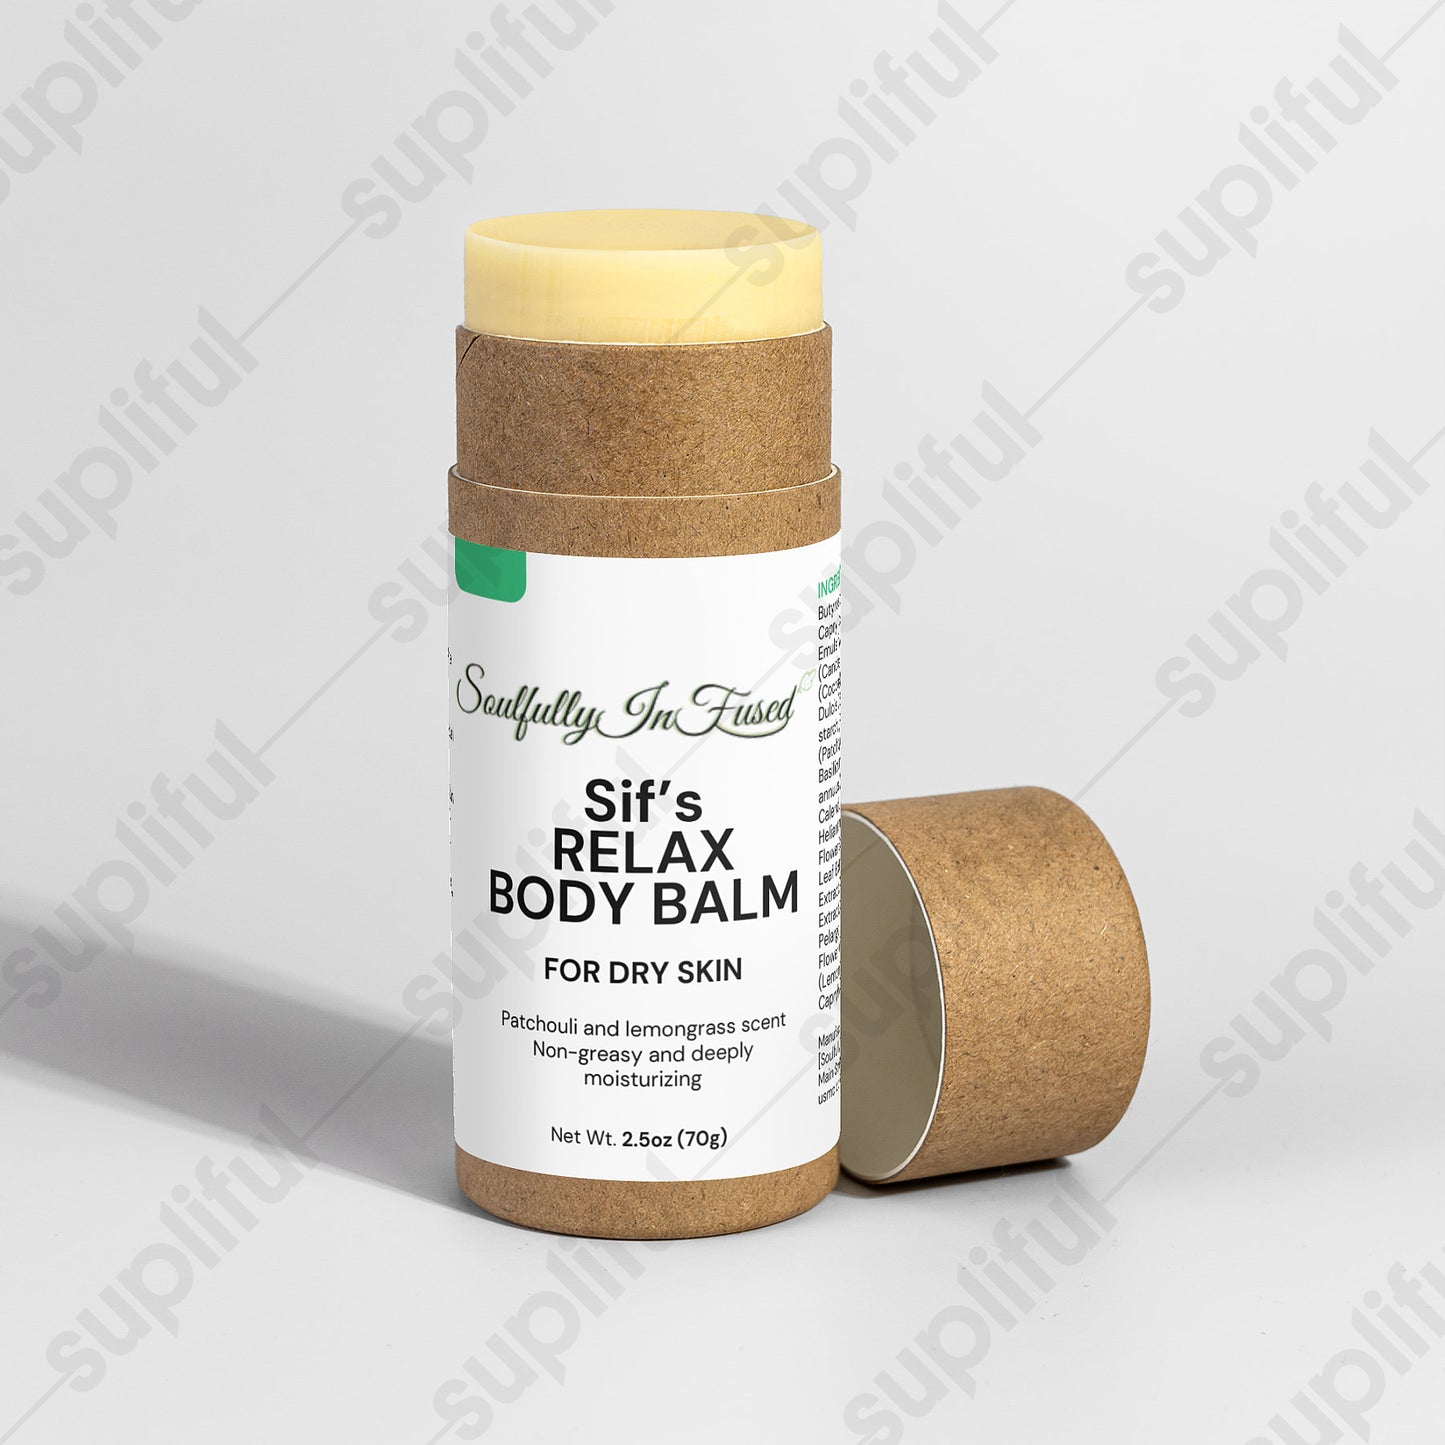 Sif's Relax Body Balm